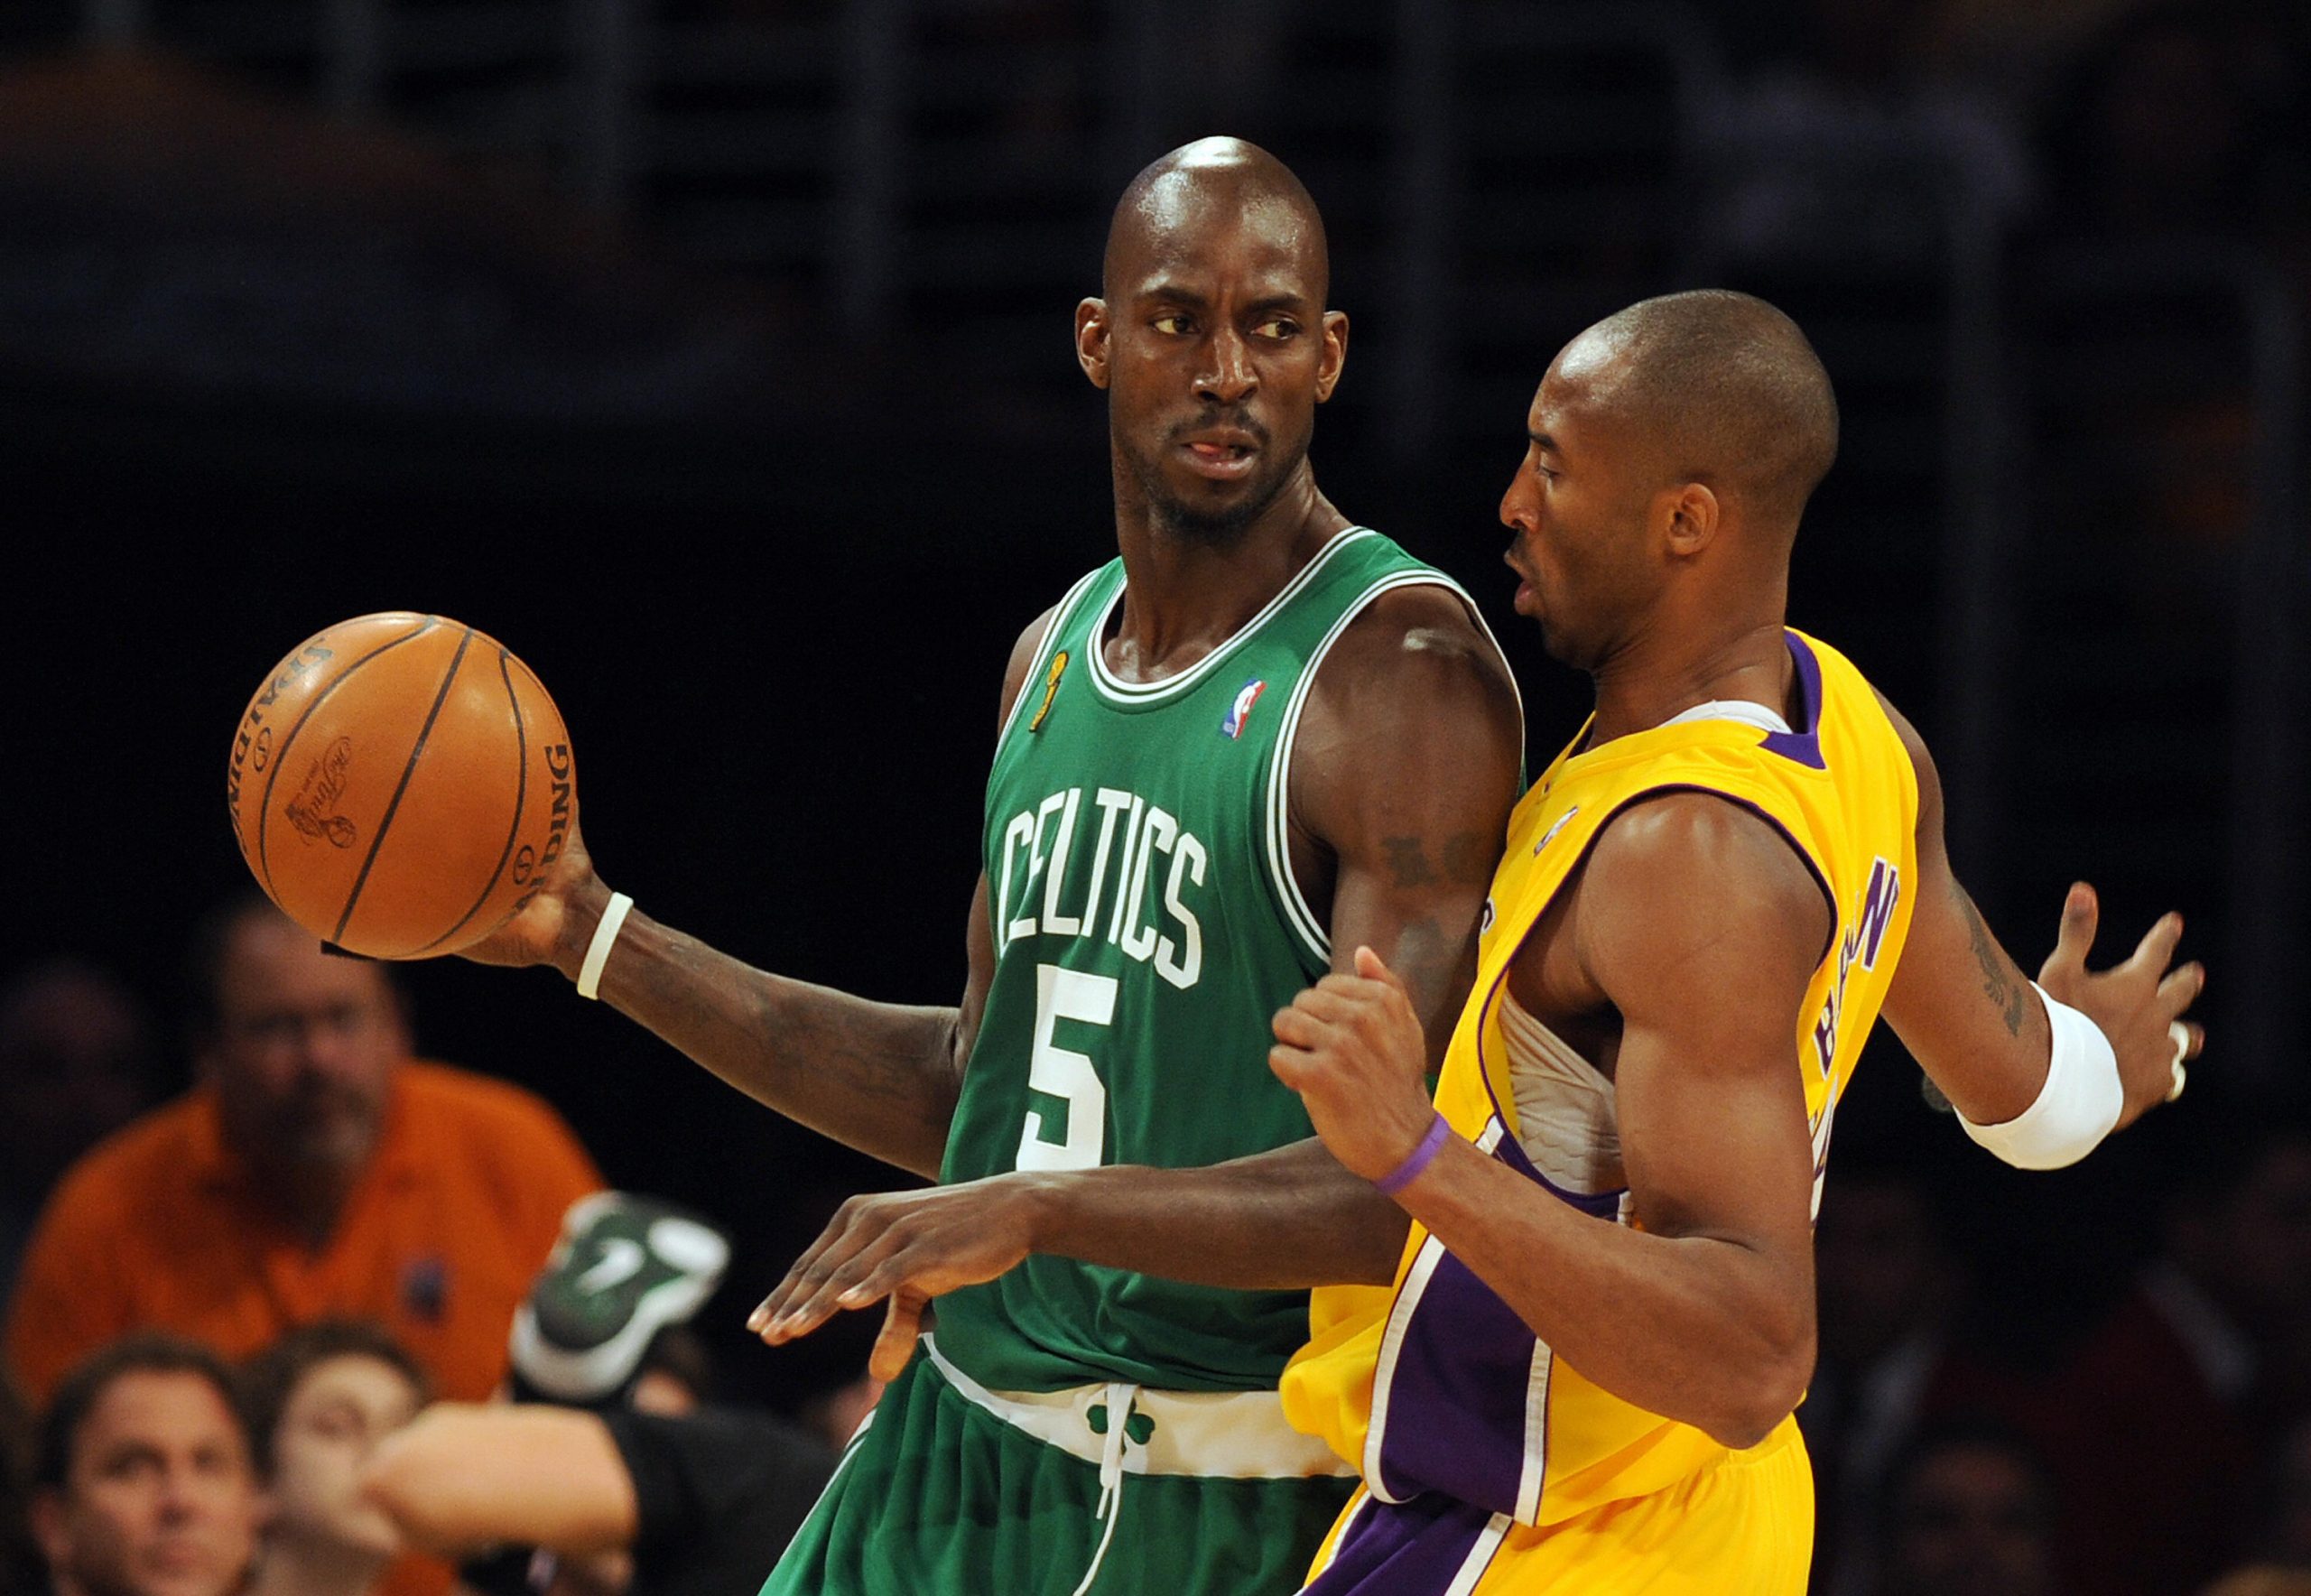 How Many Rings Could Kobe Bryant And KG Have Won Together? Landon Buford